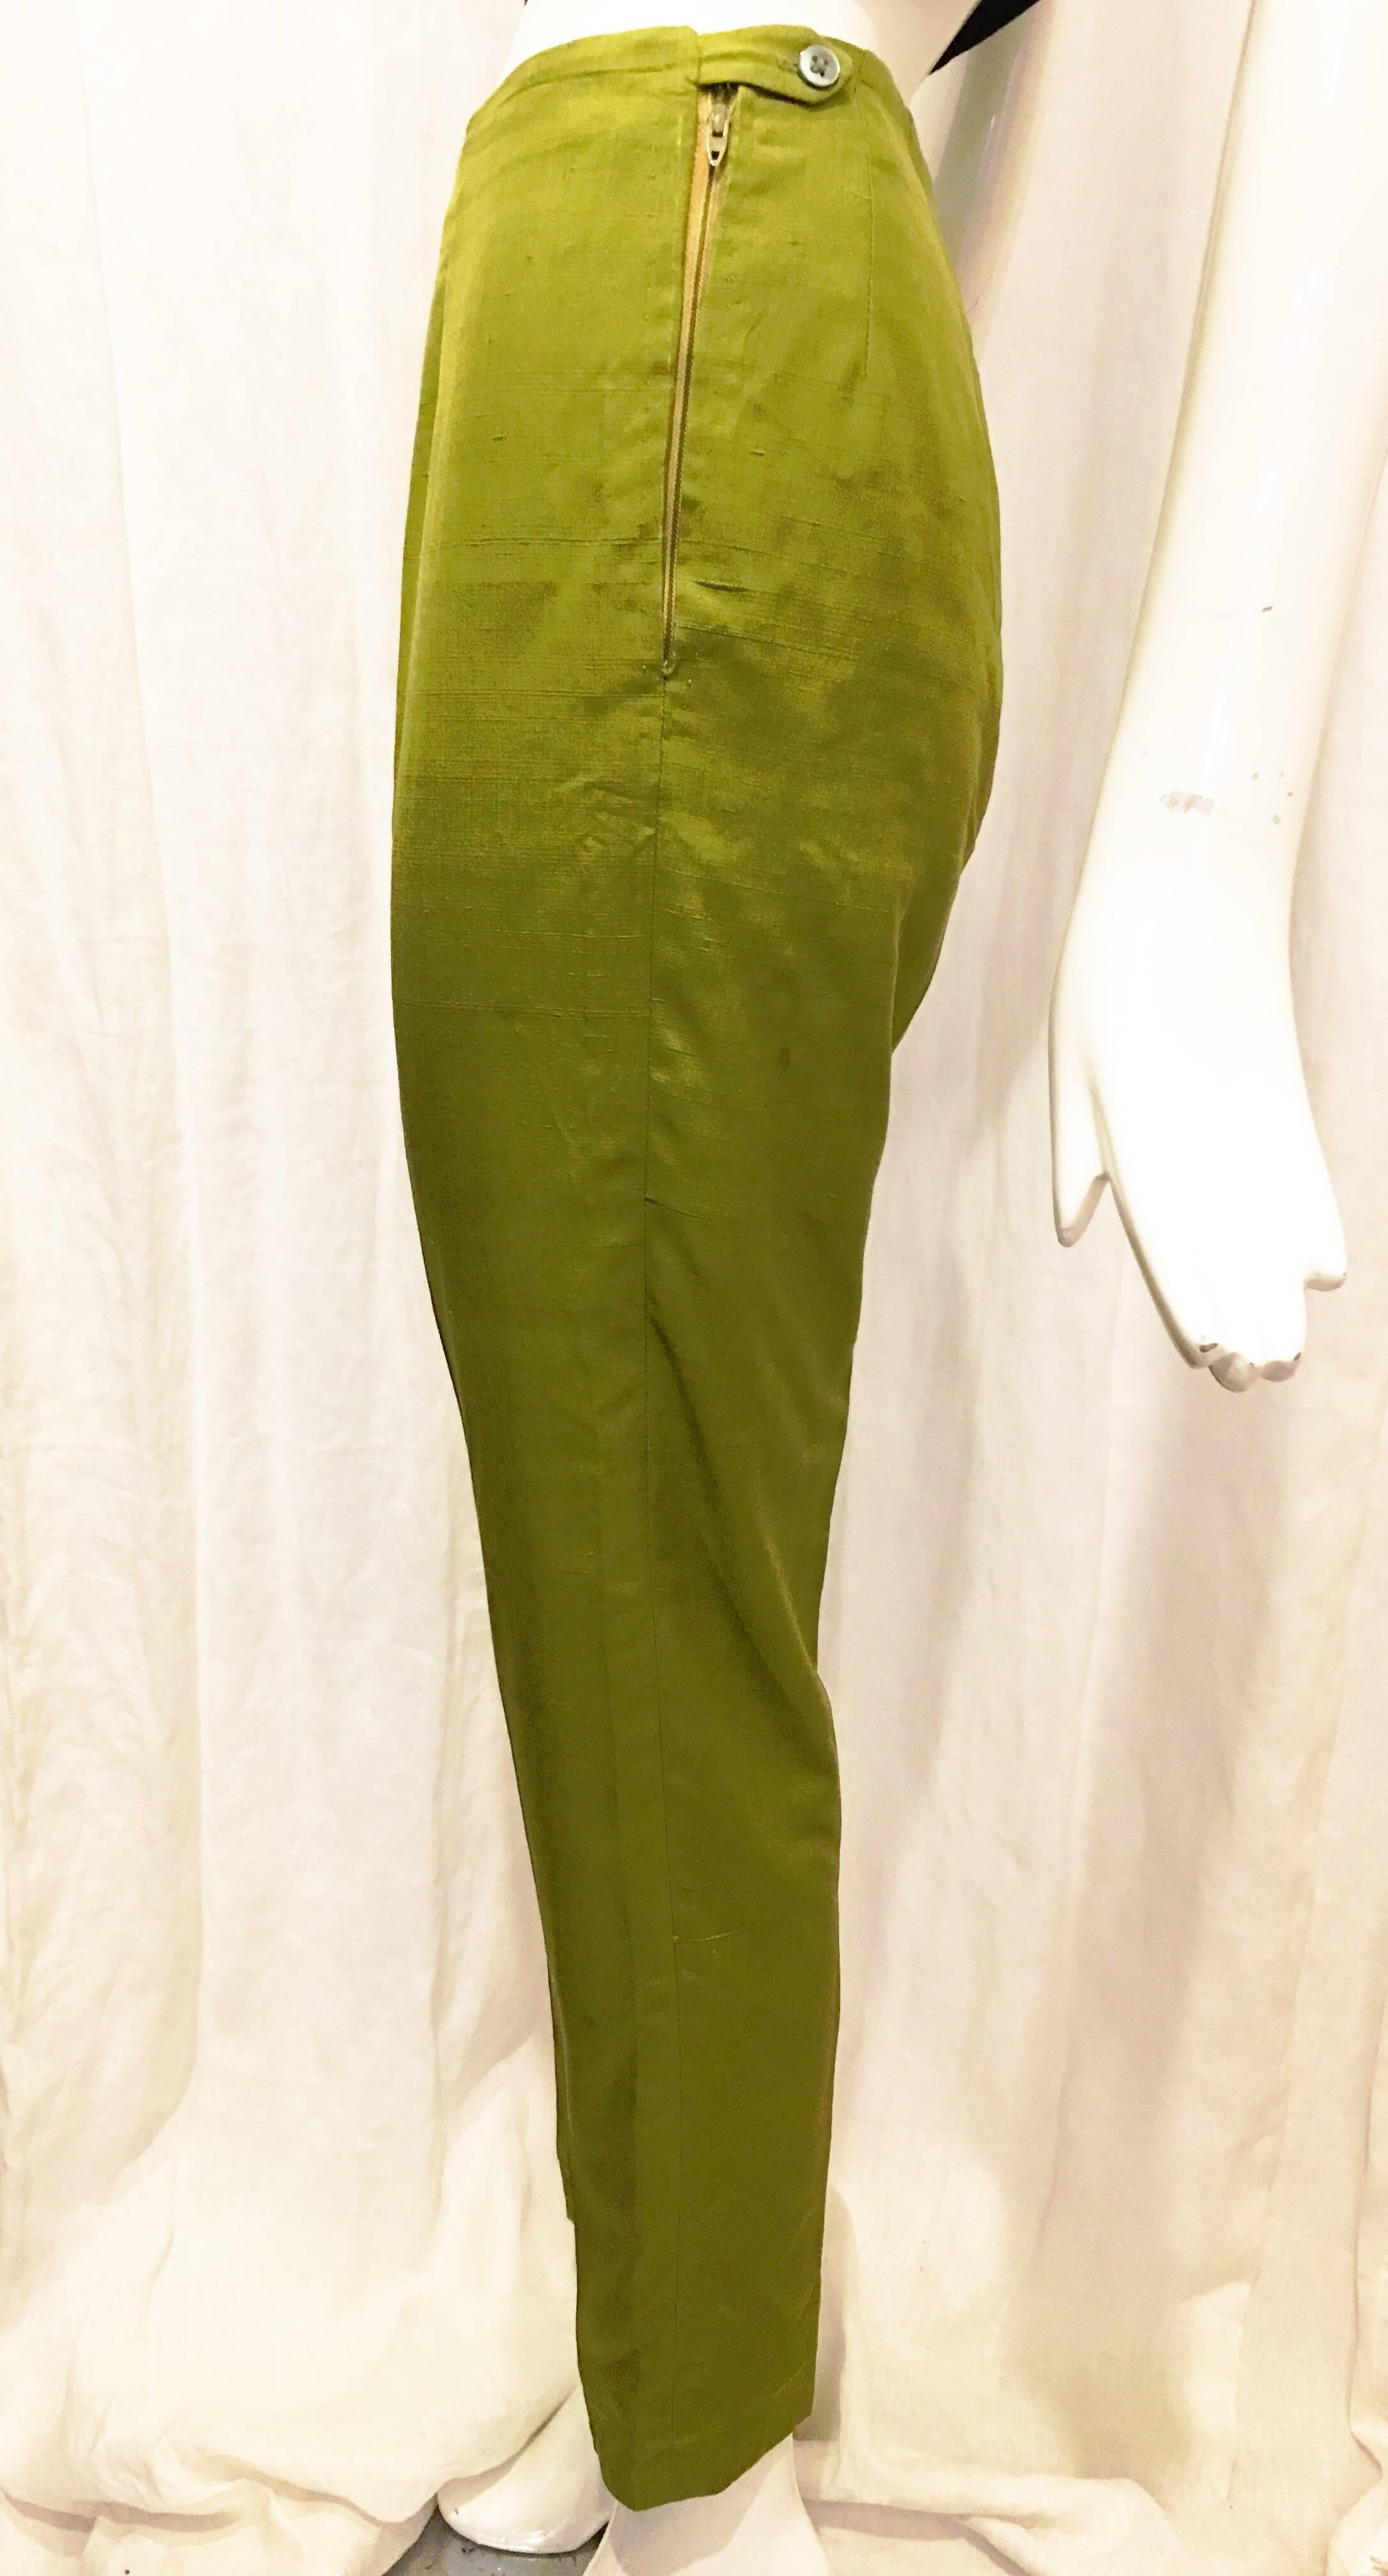 Lime green pleated linen slacks from Oleg Cassini. Hit above the ankle and rise to natural waist. No pockets. Hand sewn lace trim on inside of hem. Small pulls at fabric but nothing notable. Pants zip and button at left hip. Add a pop of color to